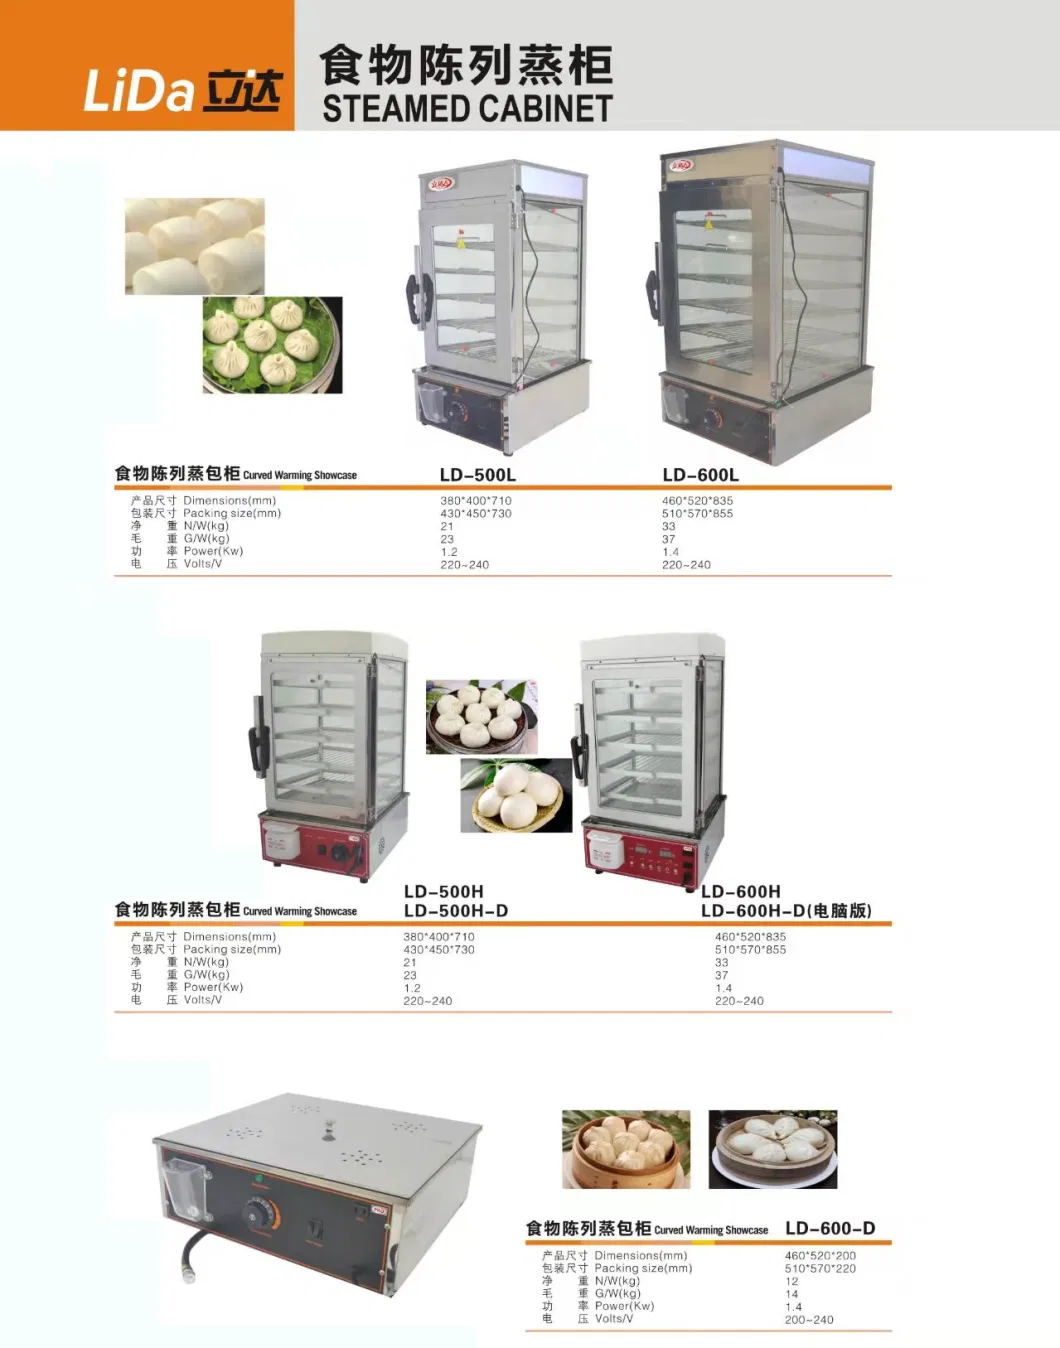 CE Approved Hot Sale Commercial Stainless Steel Convenient Store Restaurant Electric Bun Steamer 5 Layer Food Steam Steaming Machine Cabinet Showcase Display